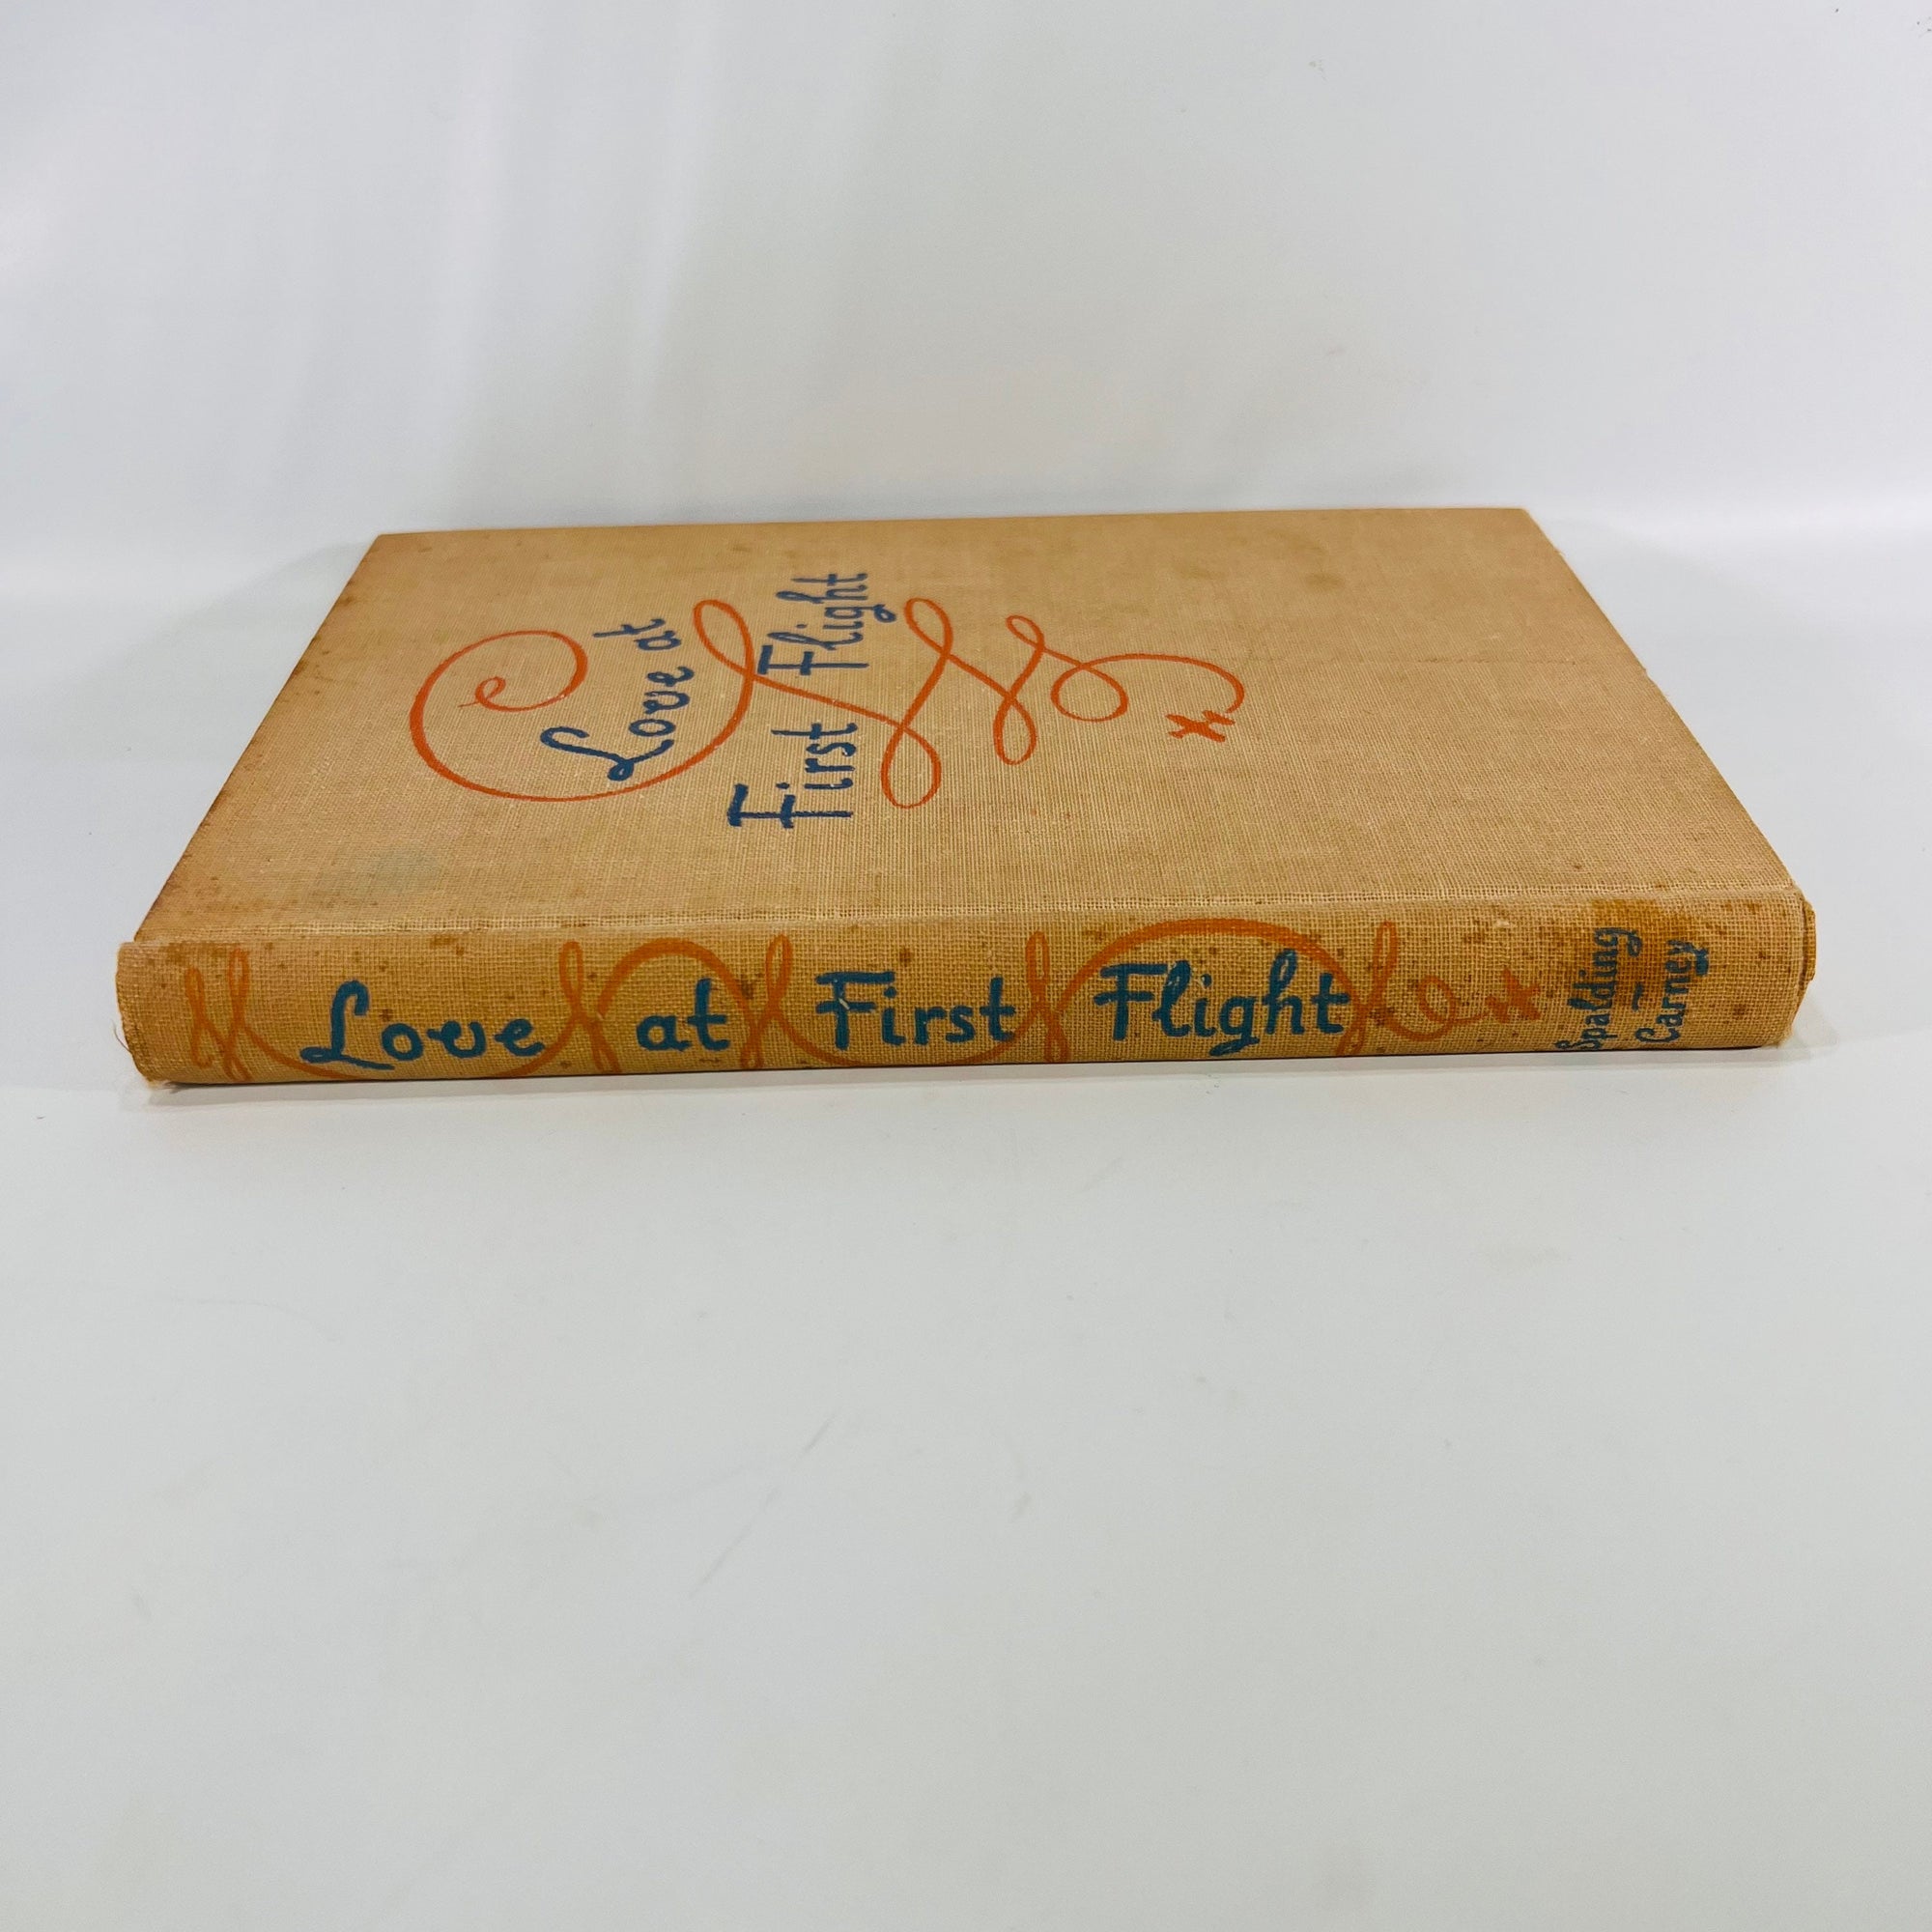 Love at First Flight by Charles Spalding illustrated by Carl Rose 1943 Houghton Mifflin Company Vintage Military Humor Book